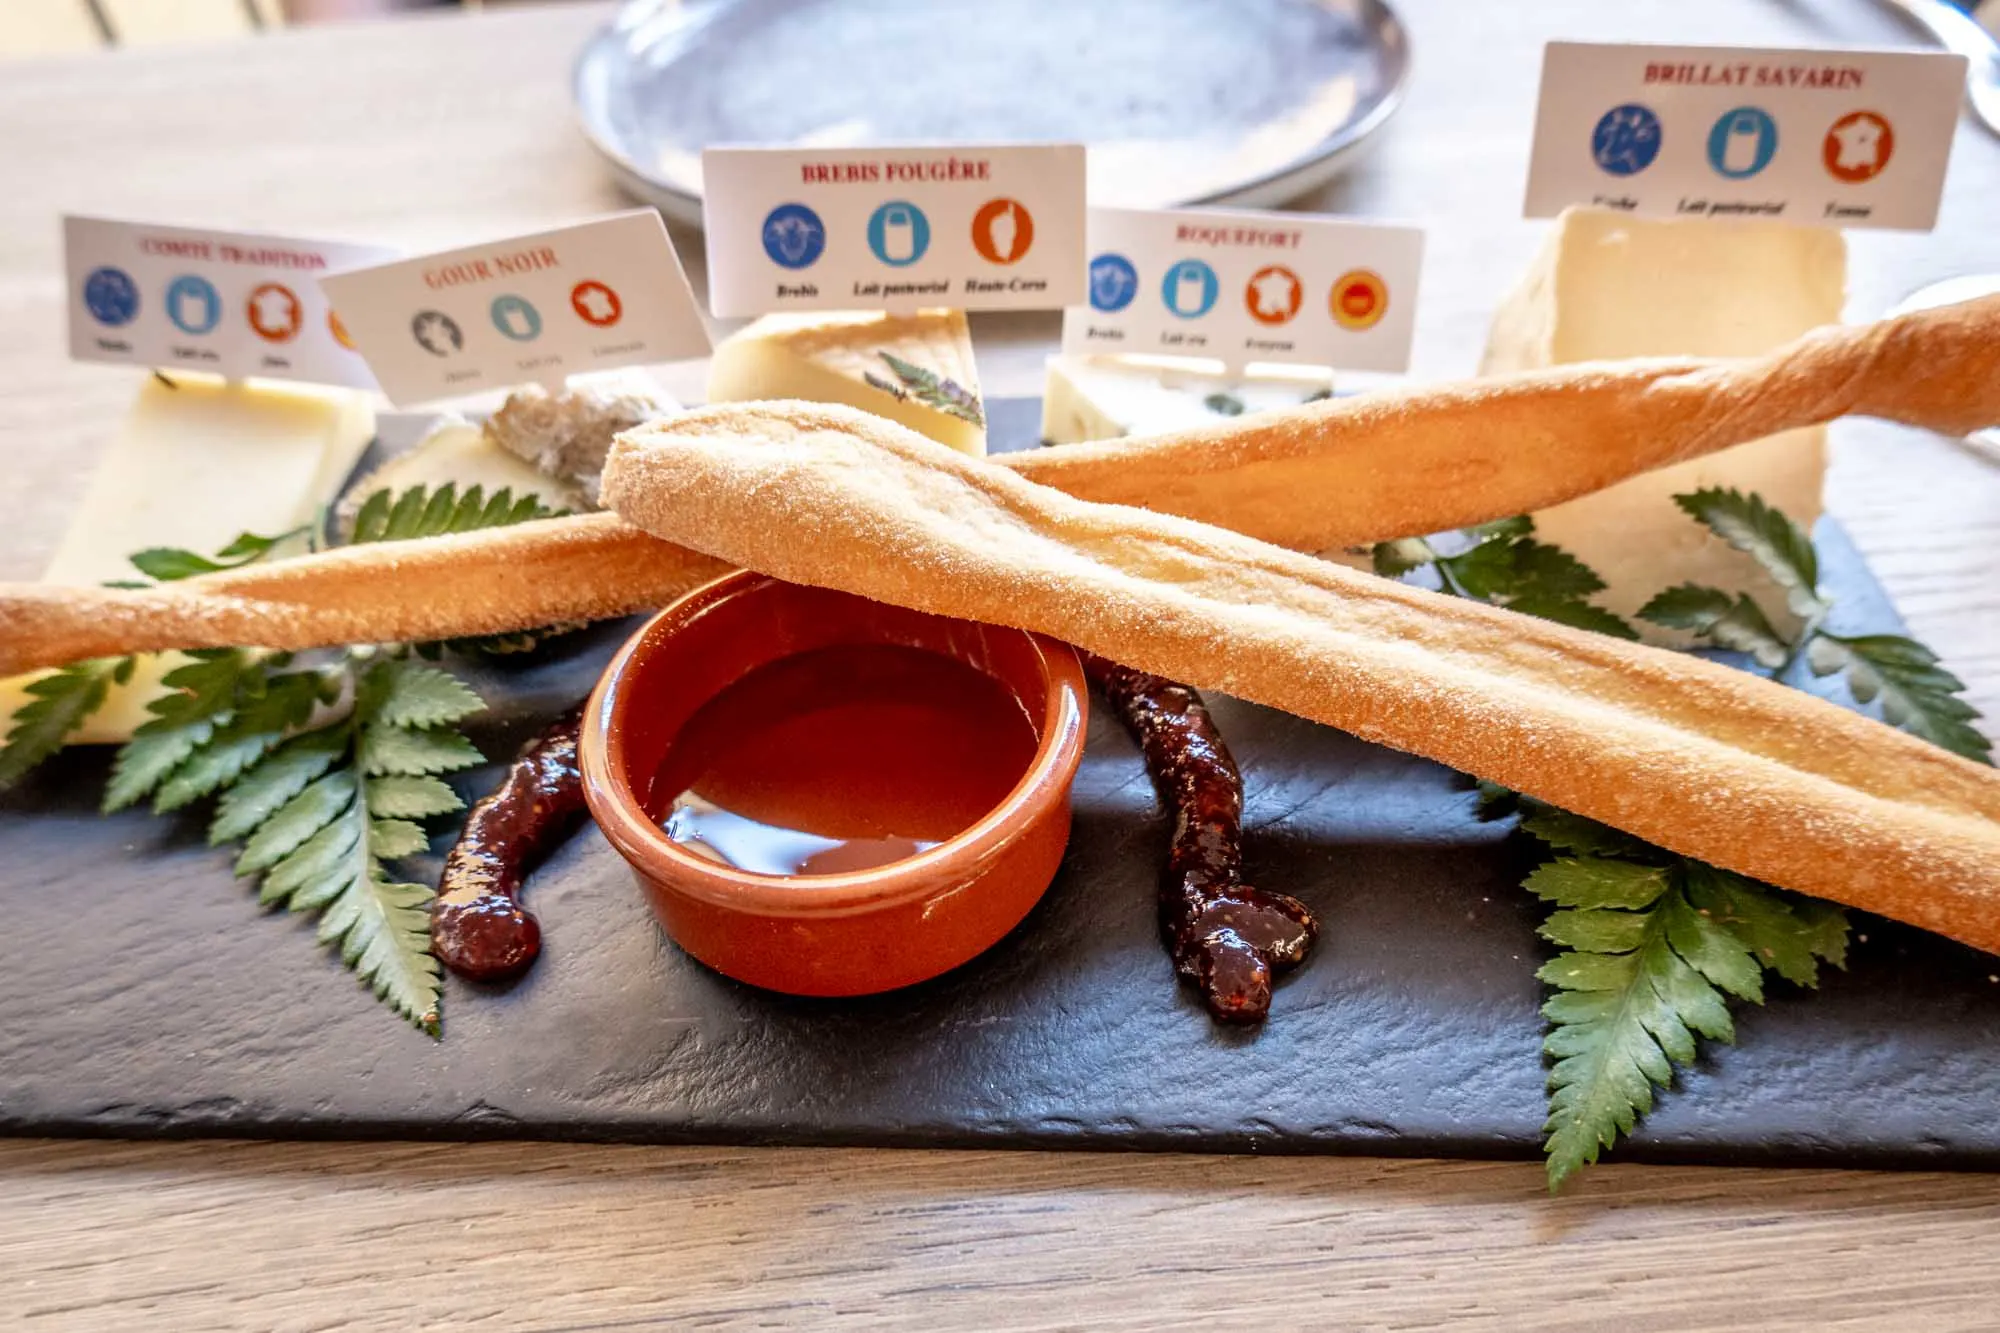 Slate platter with cheeses, jam, and breadsticks